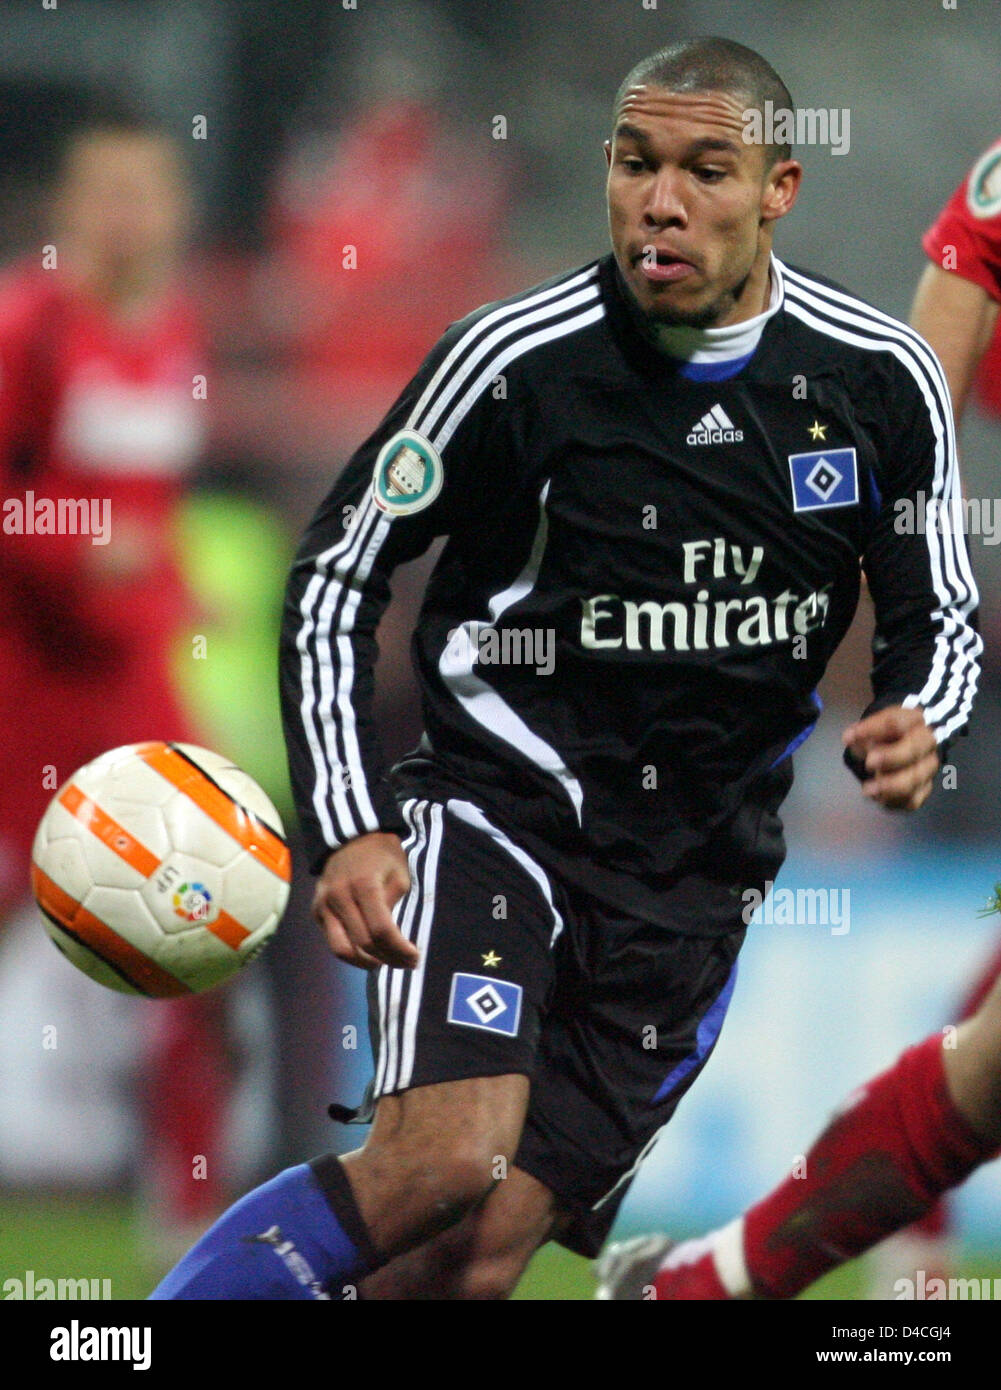 Nigel de Jong of Hamburg controls the ball during the DFB Cup round of 16 match Rot-Weiss Essen v SV Hamburg at Georg Melches stadium of Esses, Germany, 30 January 2008. Hamburg defeated third-division club Essen 3-0. Photo: Roland Weihrauch Stock Photo